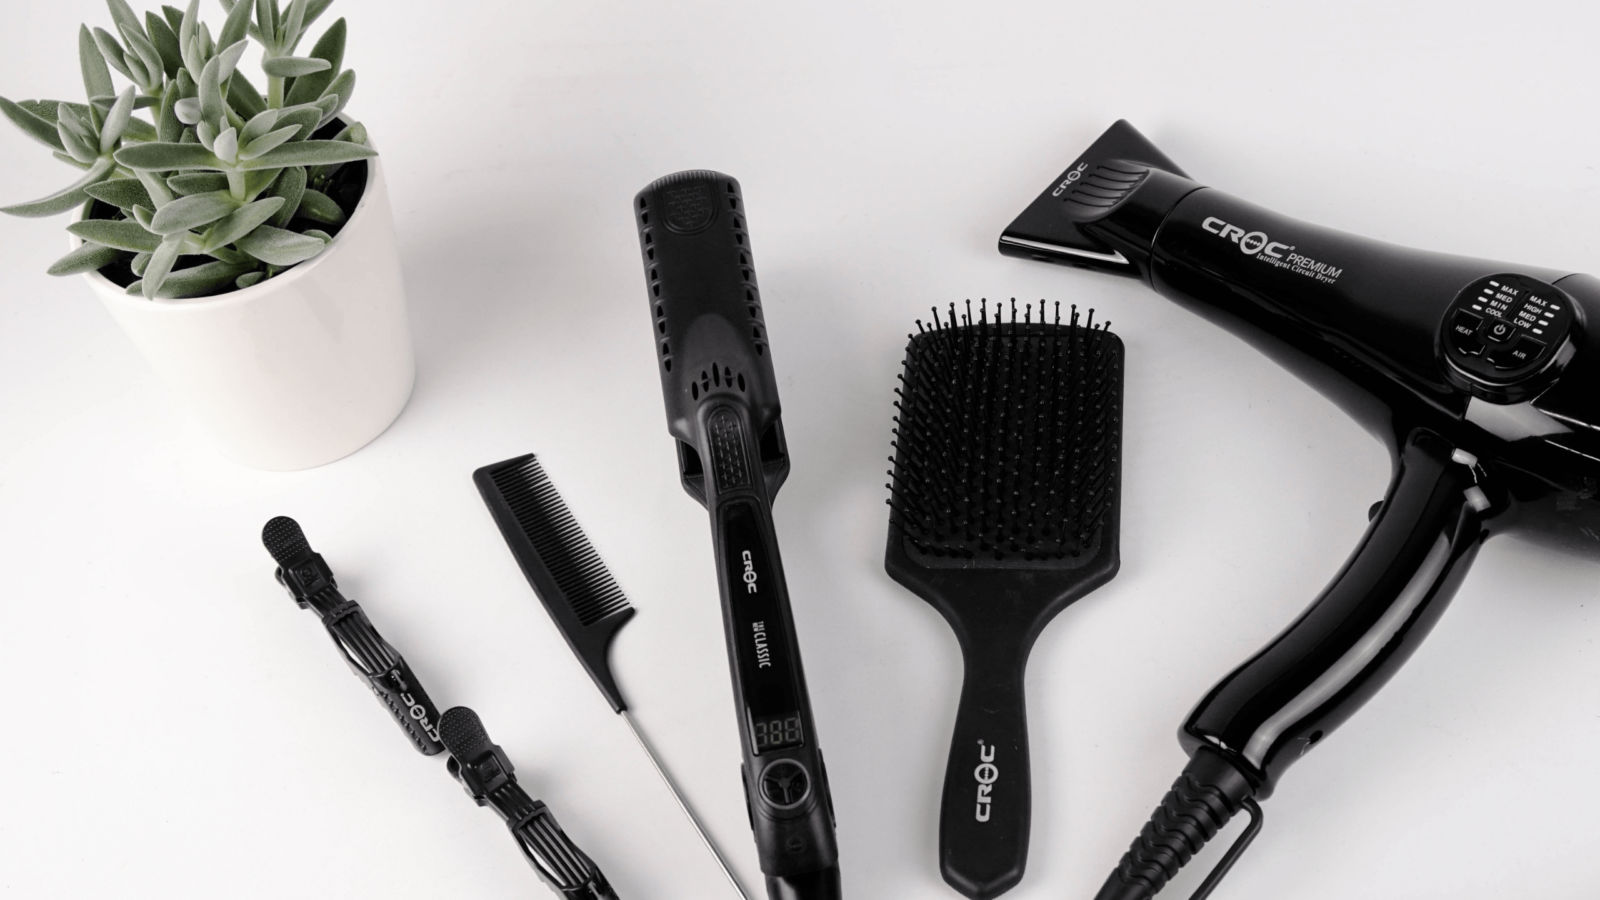 Here’s how to give yourself a salon-worthy blowout at home